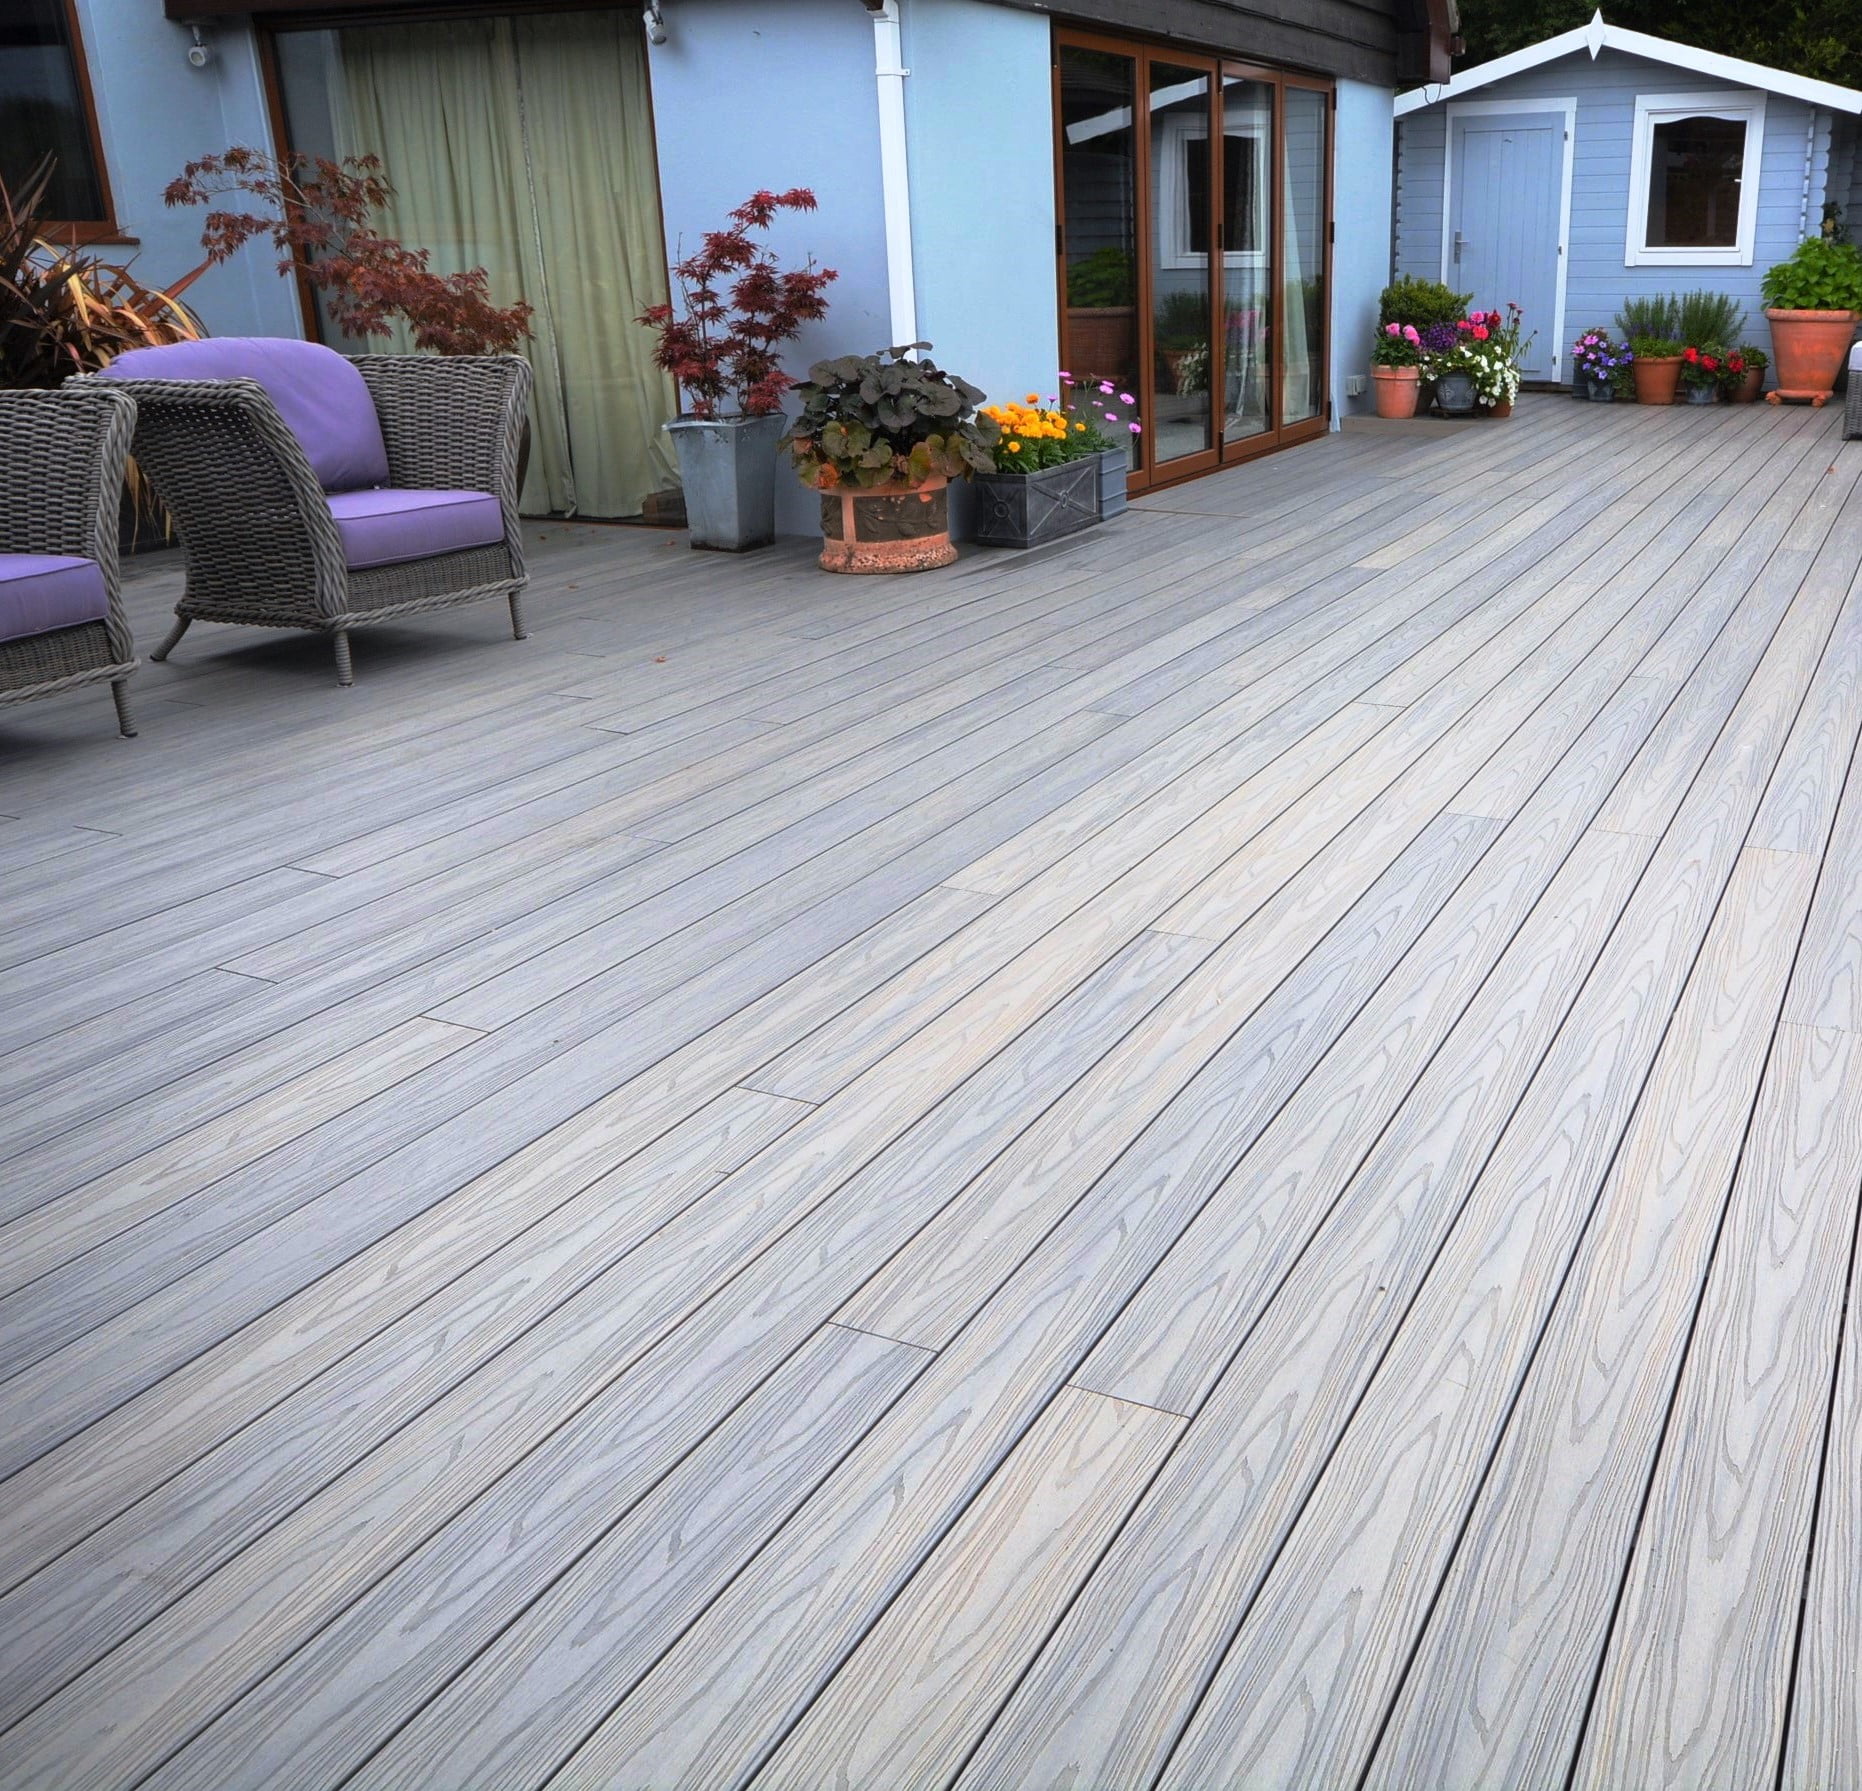 wooden composite decking duodeck yeovil